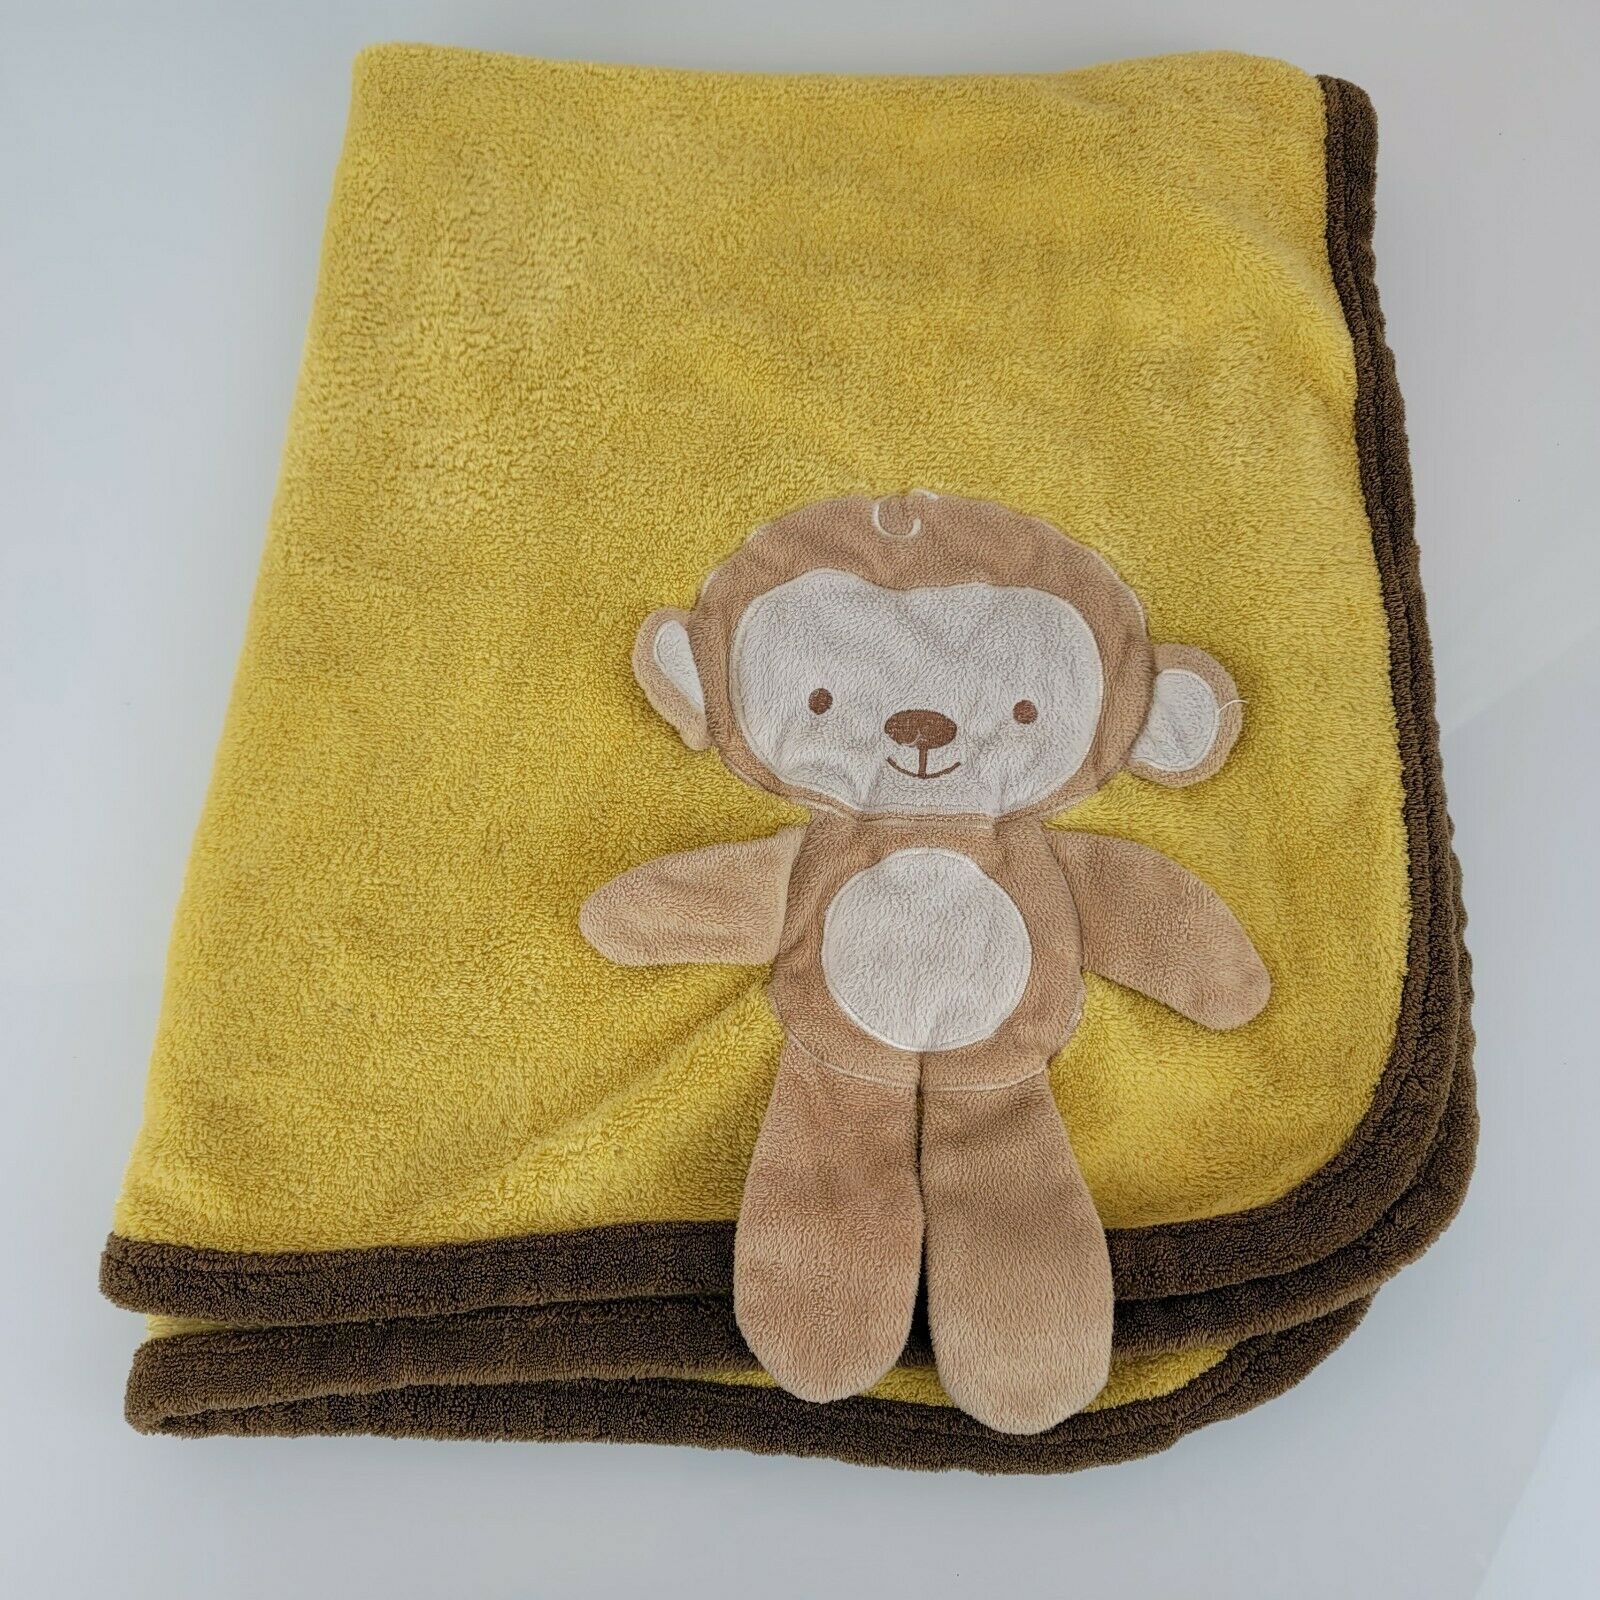 Primary image for Bean Sprout Beansprout Baby Blanket Yellow Brown 3D Monkey Plush Fleece